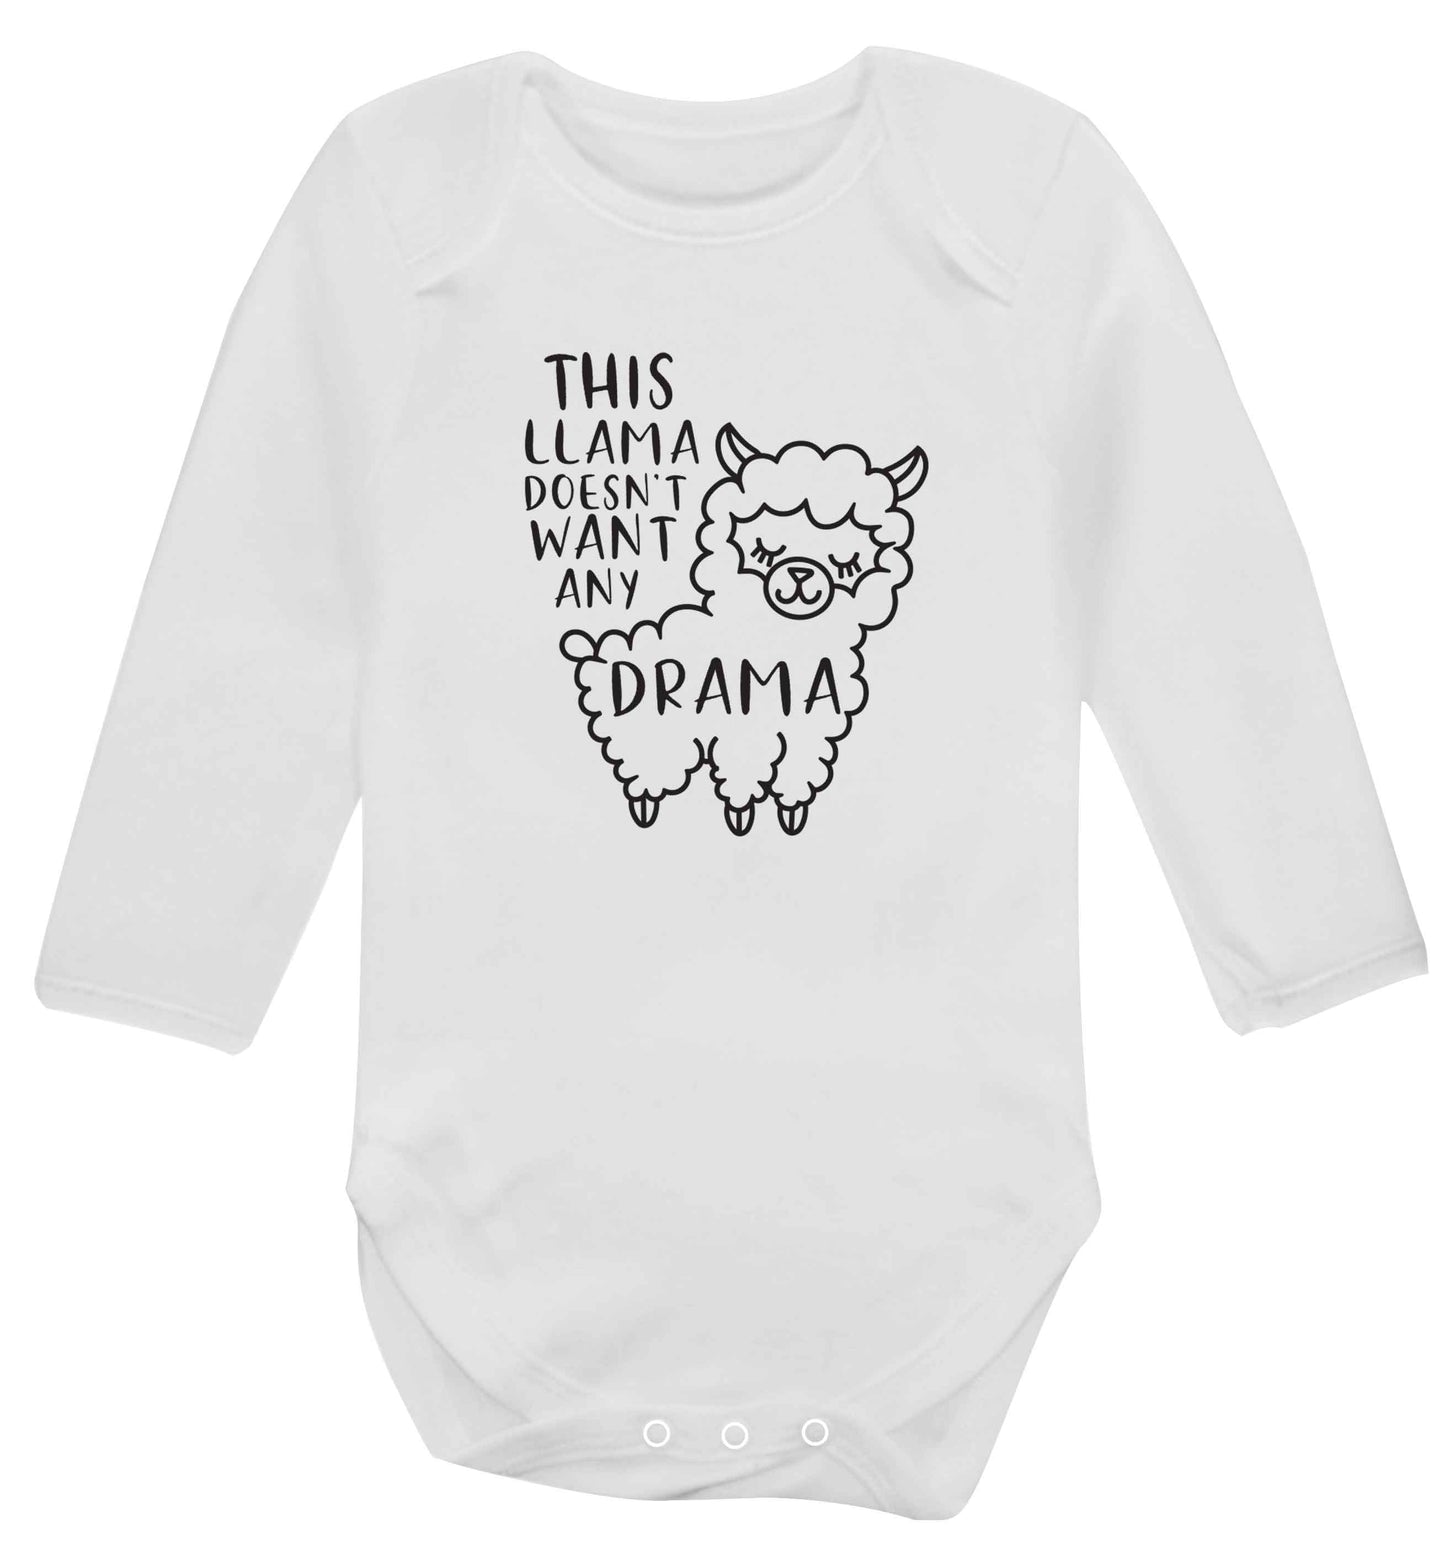 This Llama doesn't want any drama baby vest long sleeved white 6-12 months